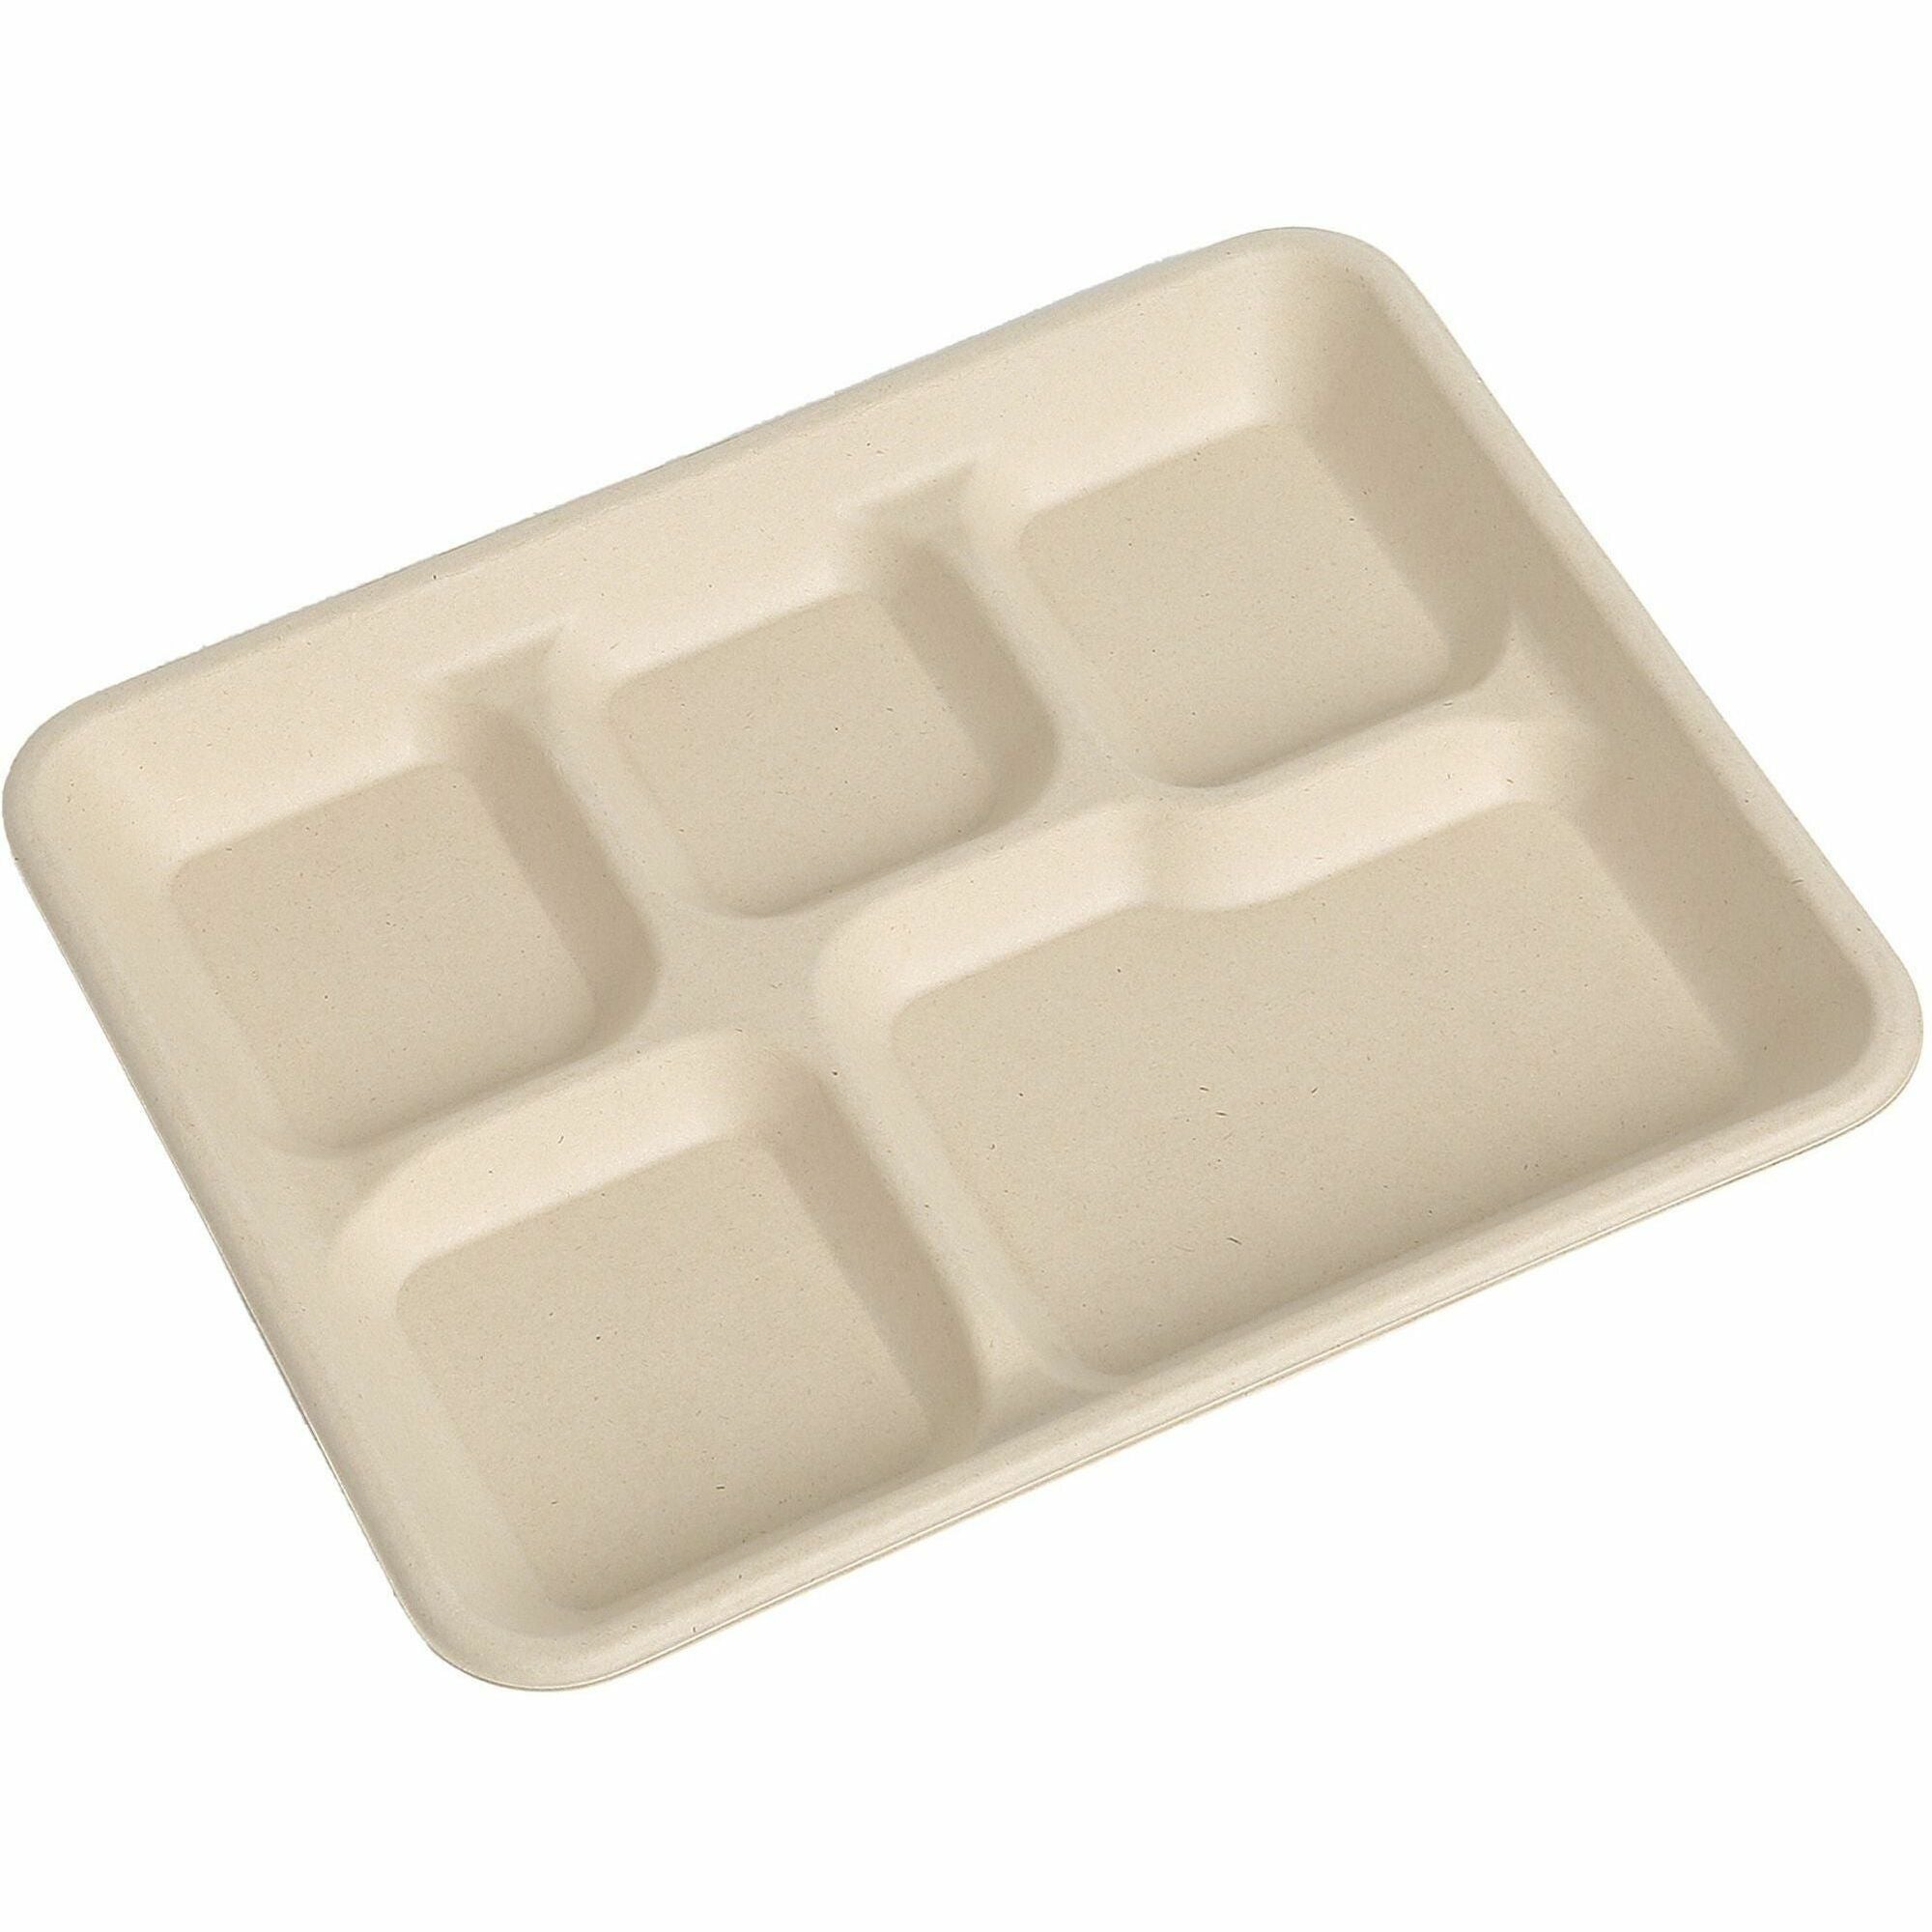 blutable-8x10-5-compartment-lunch-trays-food-natural-molded-fiber-sugarcane-fiber-body-500-carton_rmlmf5c - 1